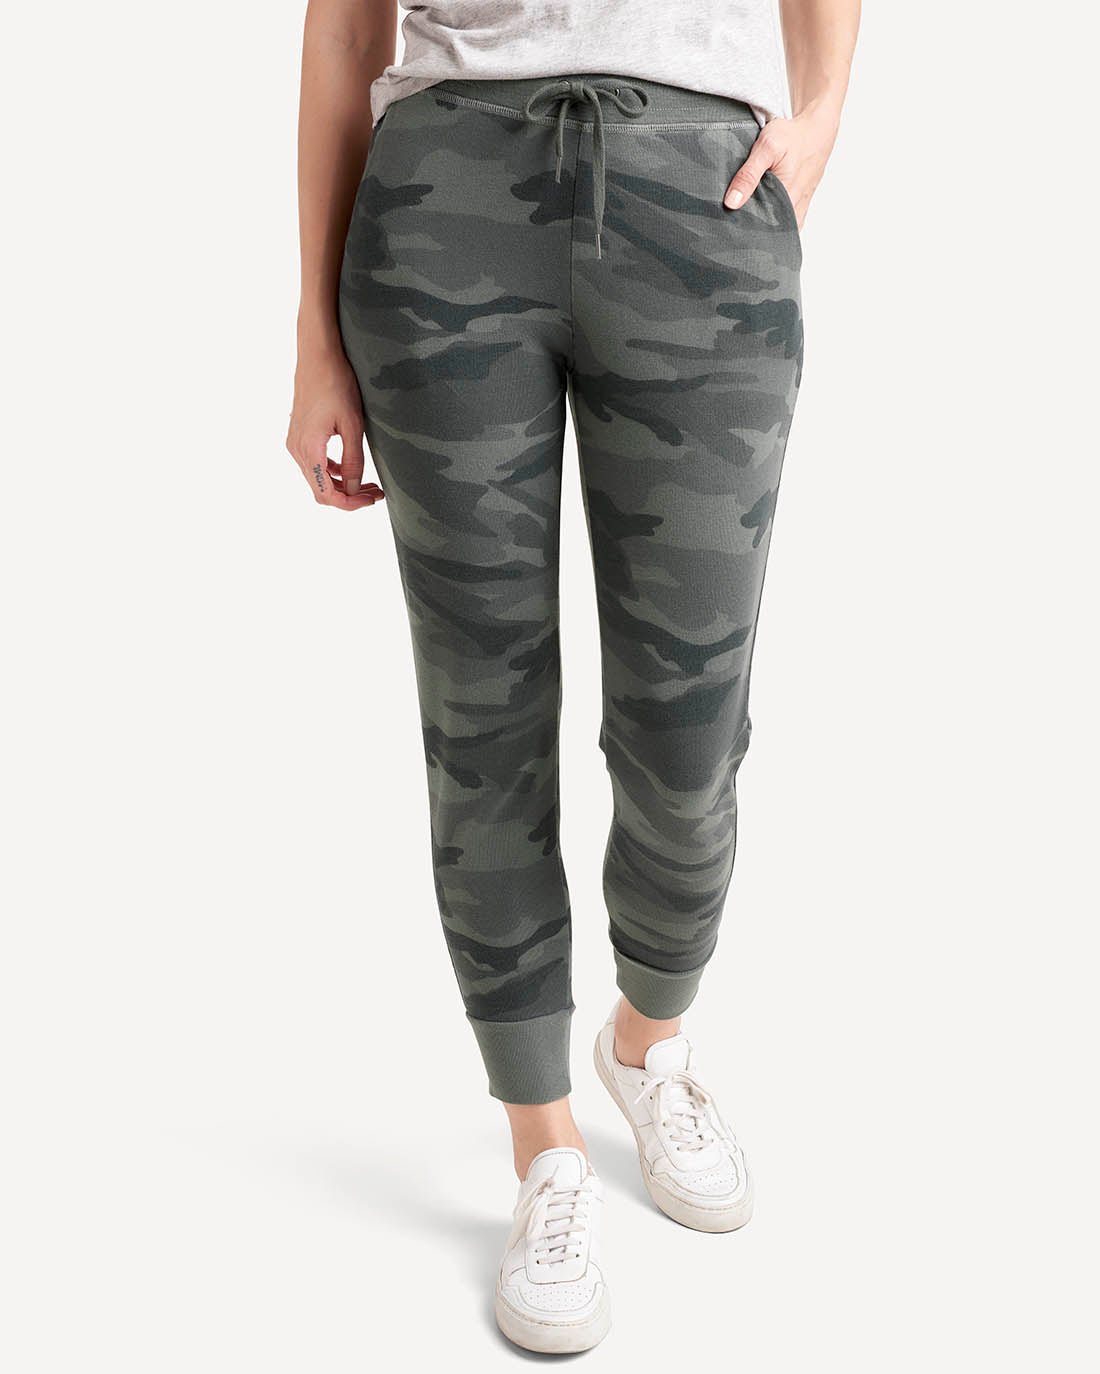 X-Small, Grey Red) PIKADINGNIS Women Camouflage Joggers Long Pants